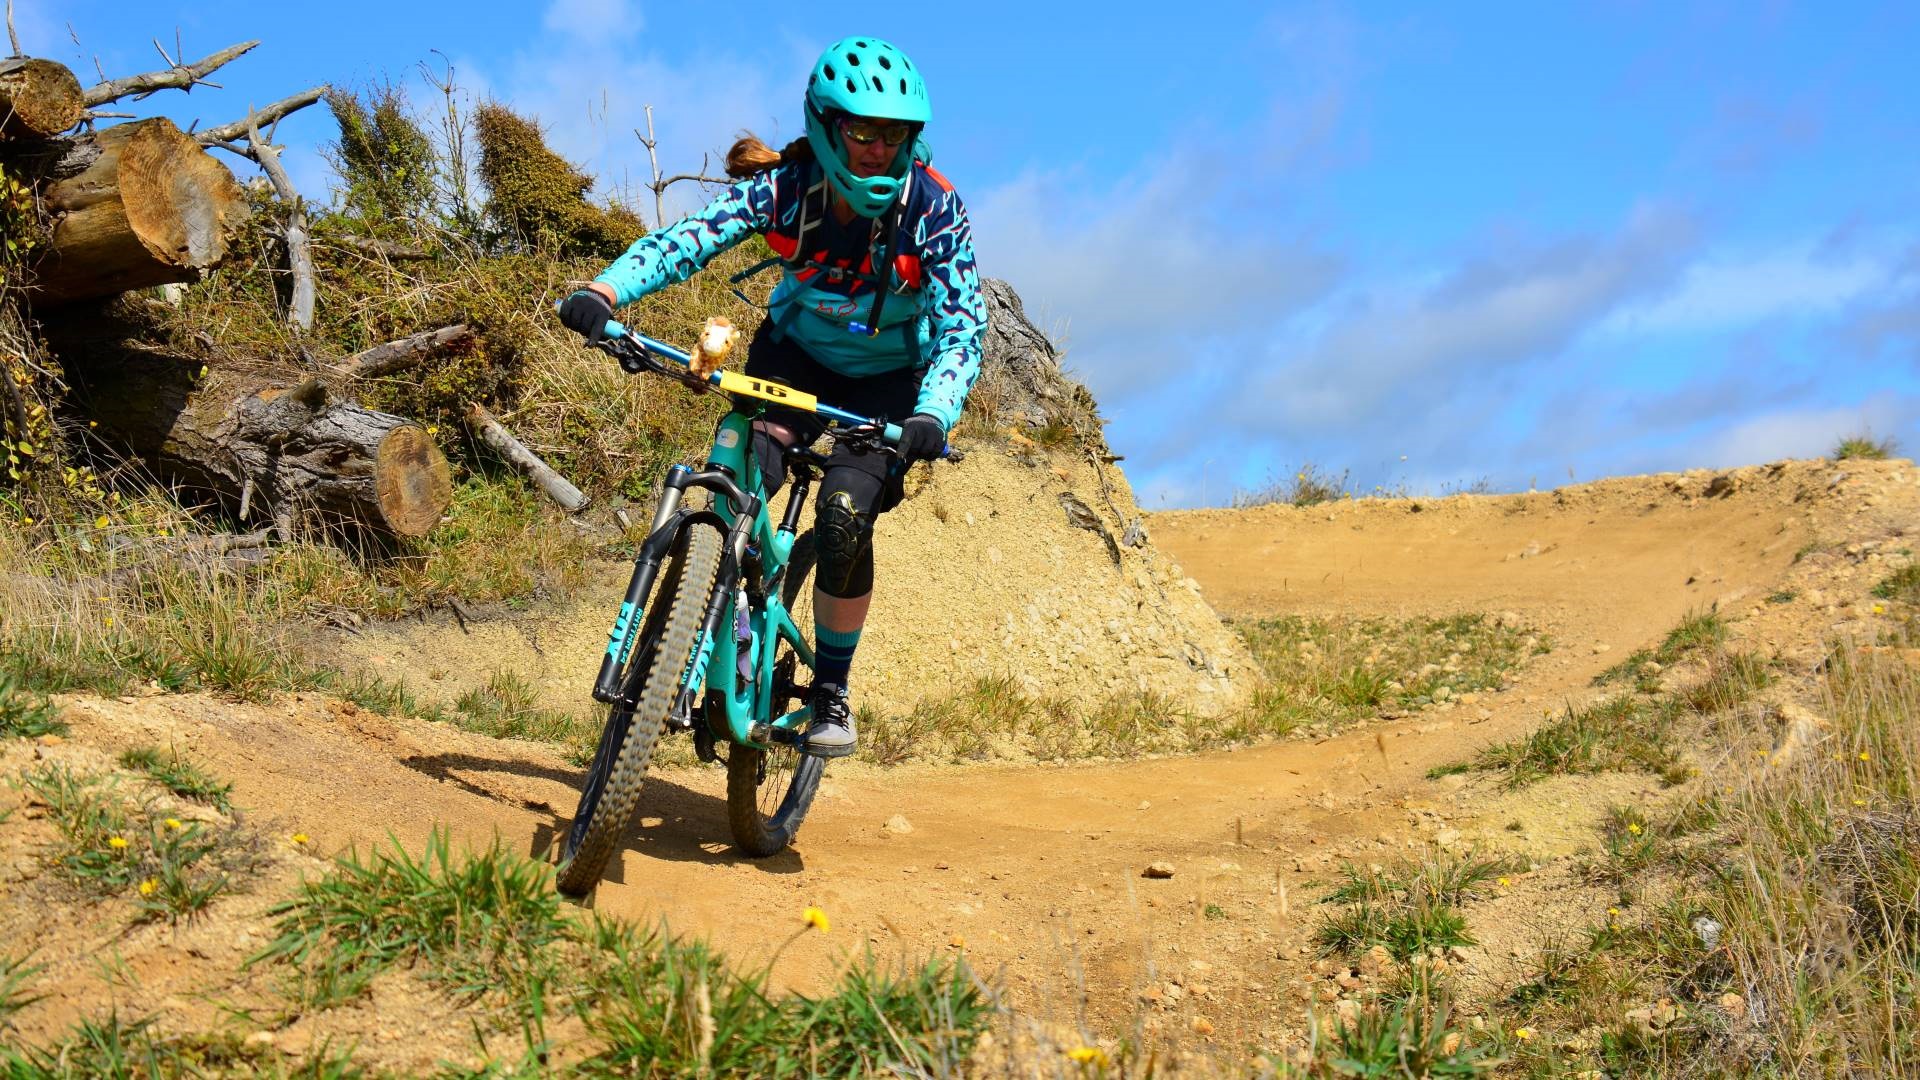 Photo shows woman with full helmet and protective gear riding a mountainbike on a downhill dirt track.